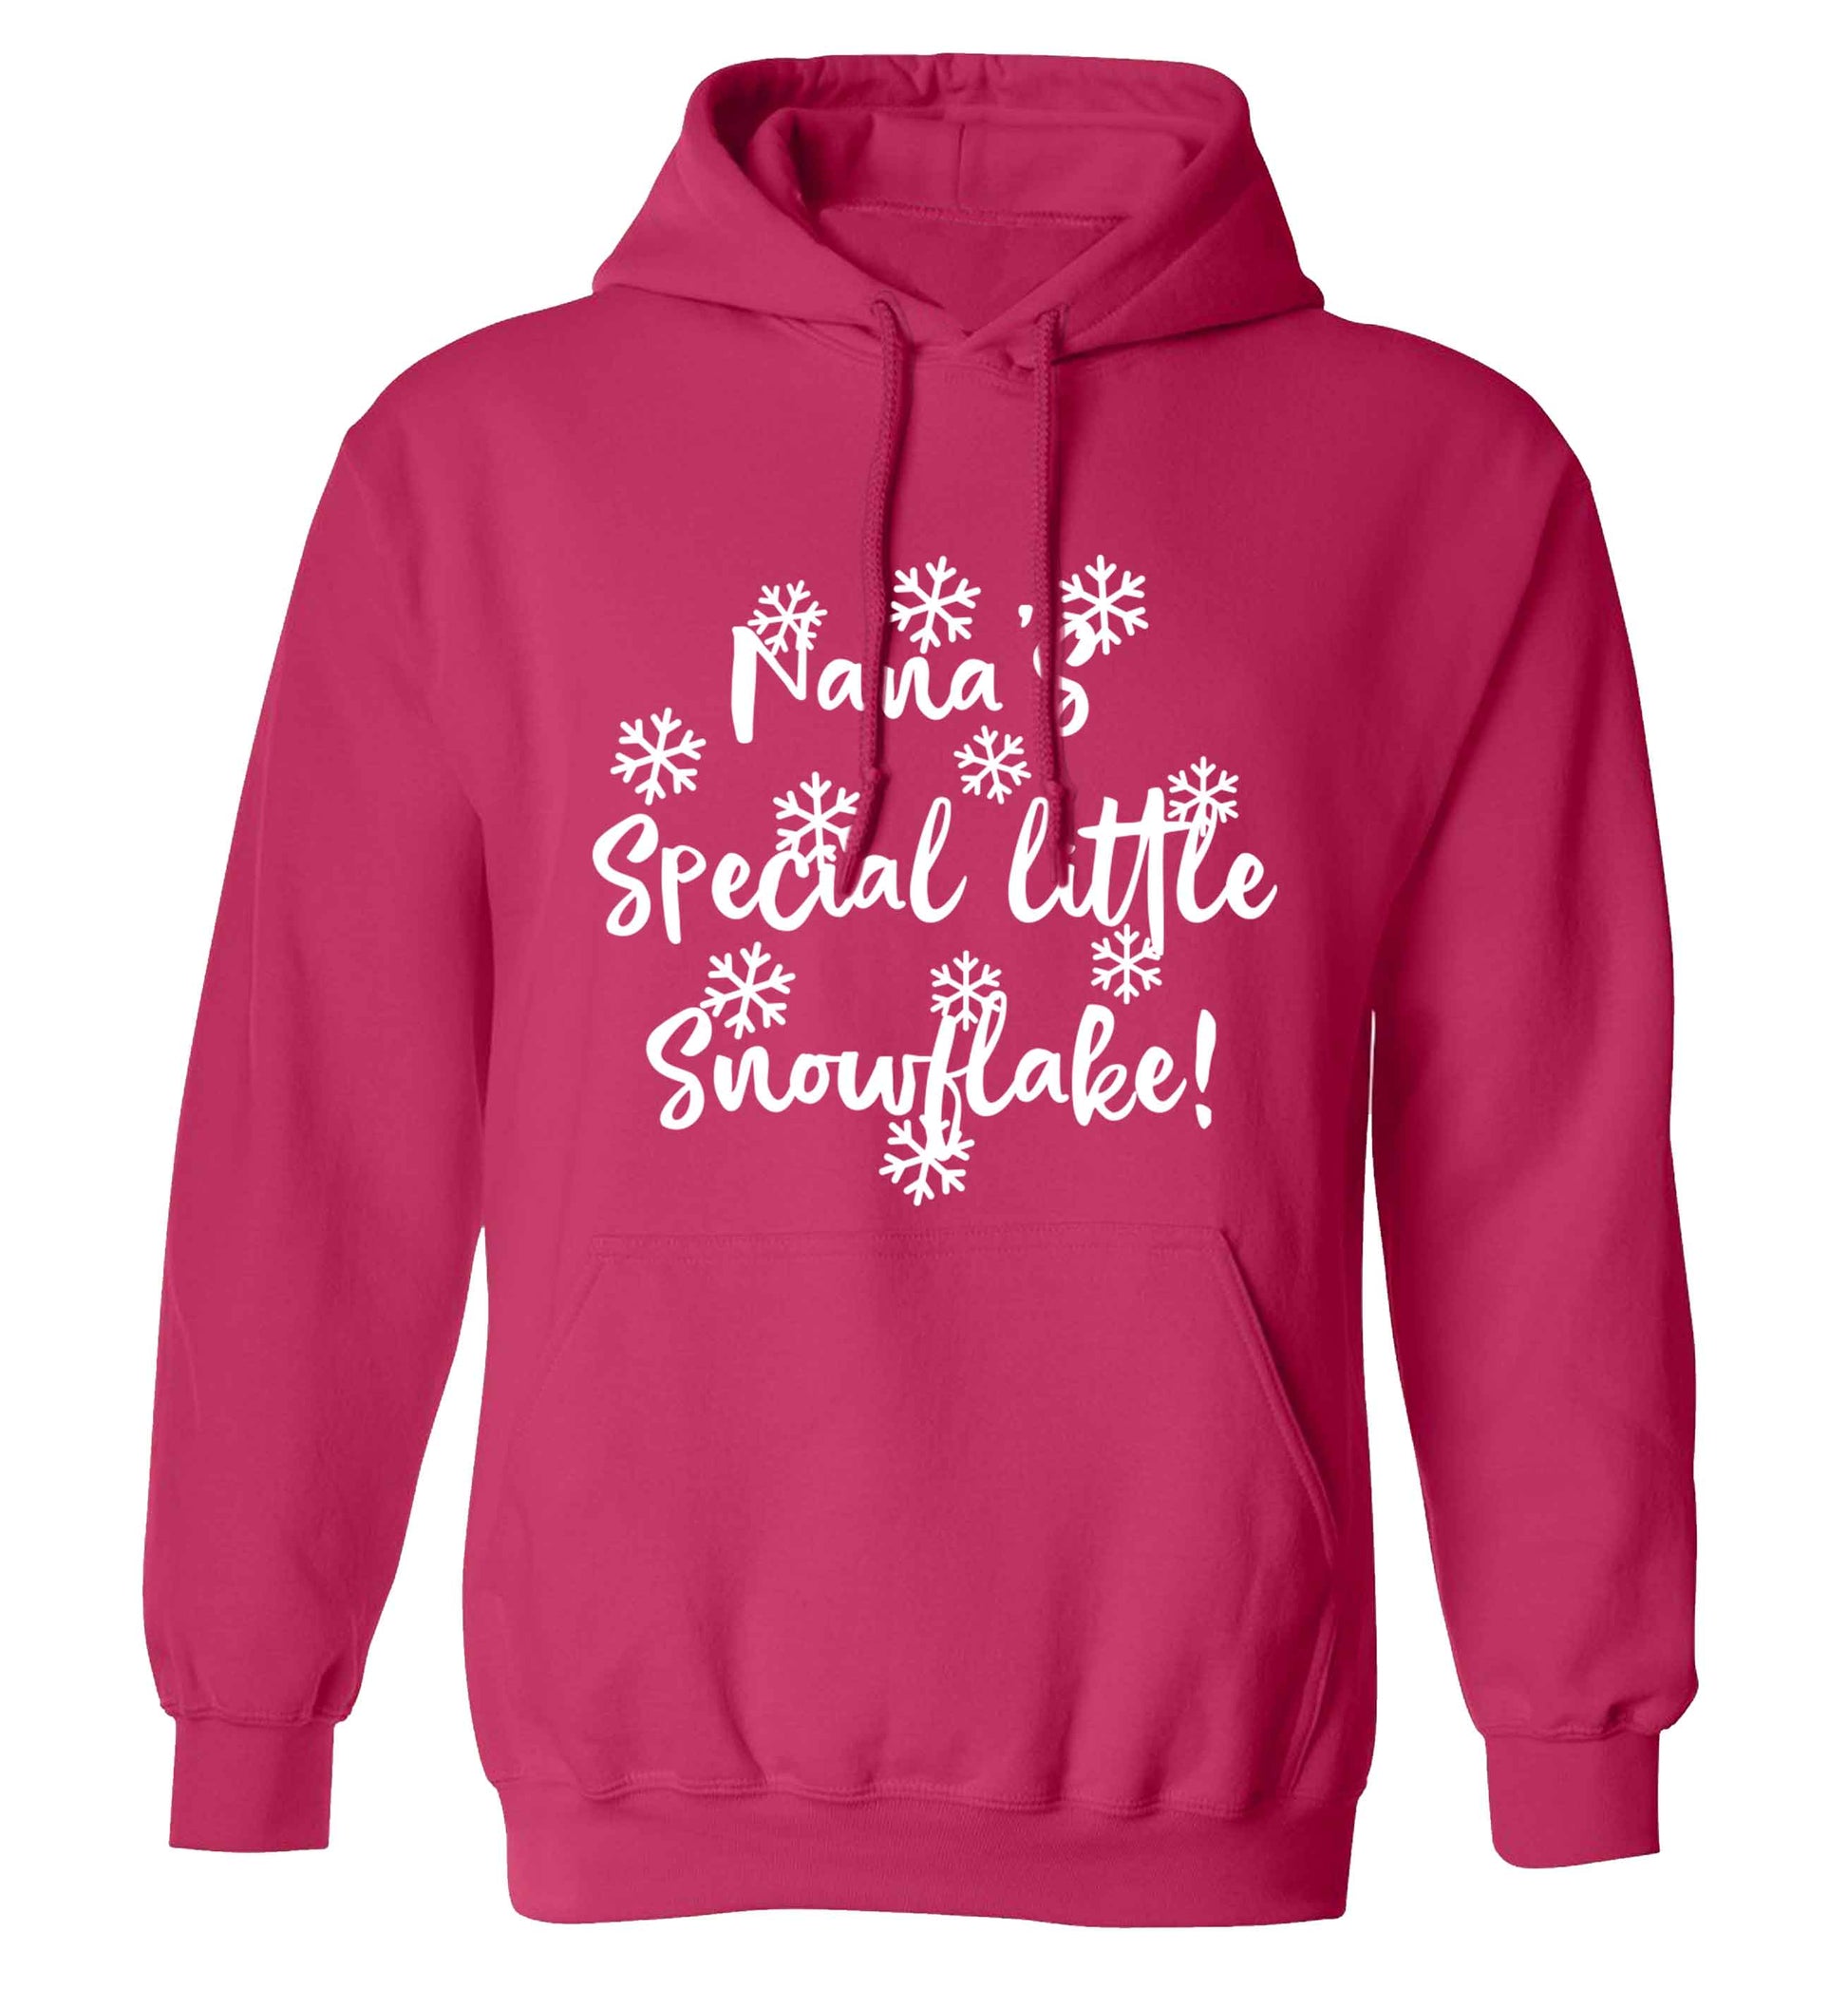 Nana's special little snowflake adults unisex pink hoodie 2XL